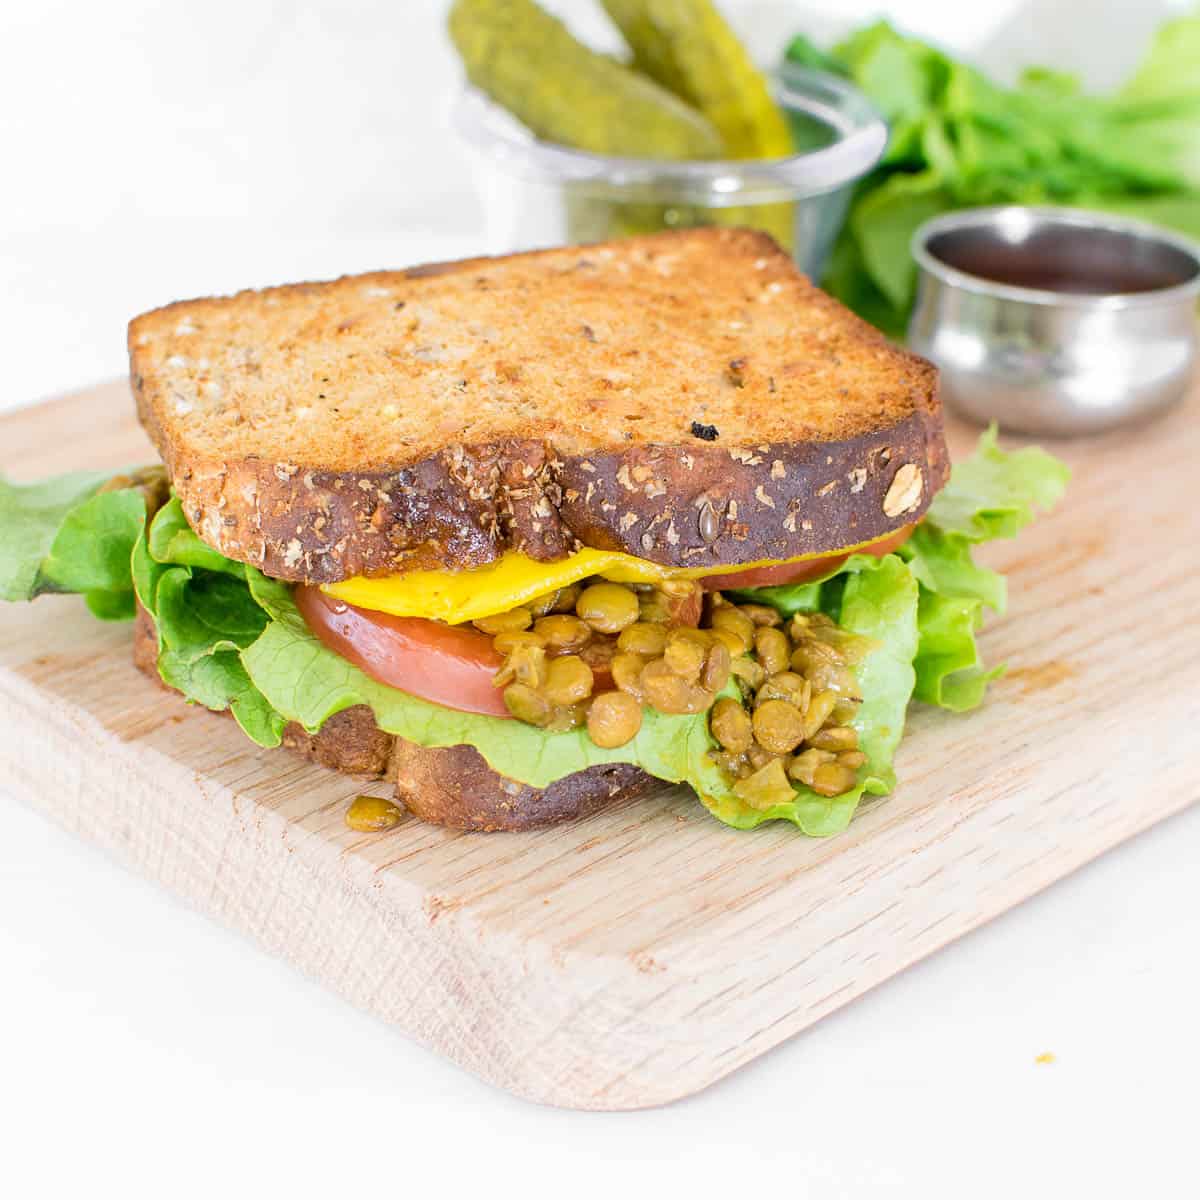 front view of assembled lentil sandwich on a wooden board.